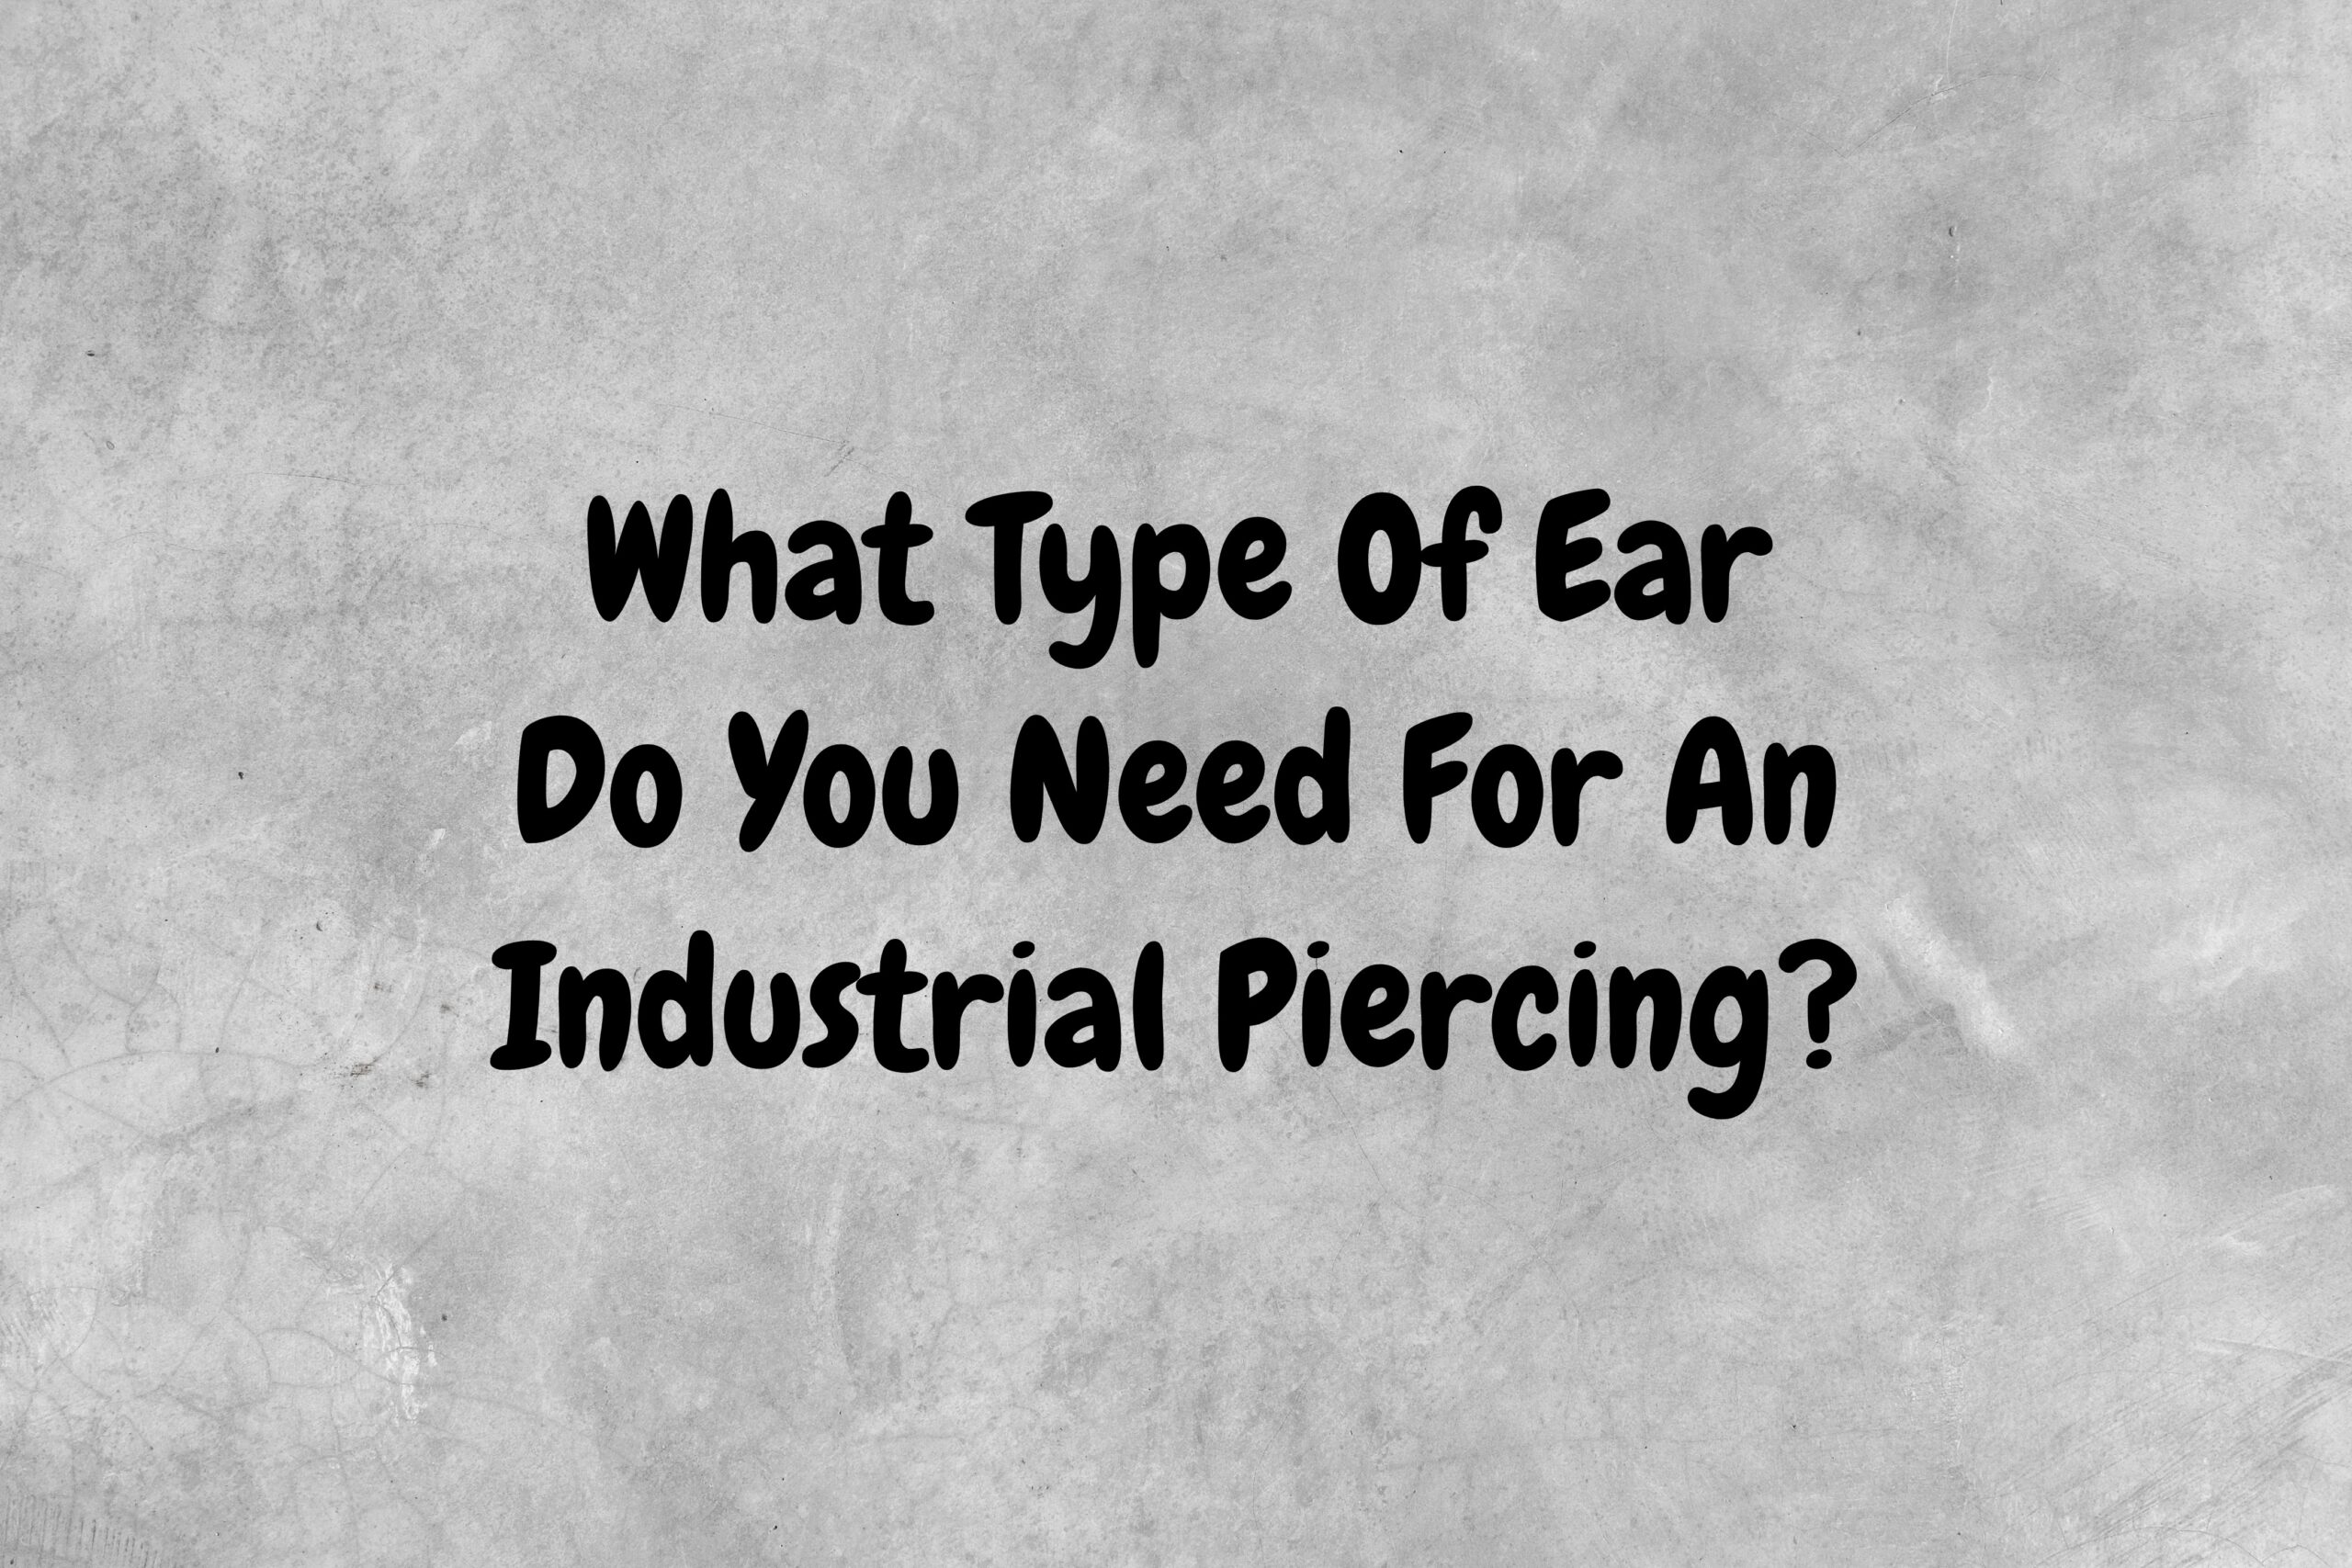 What Type Of Ear Do You Need For An Industrial Piercing?